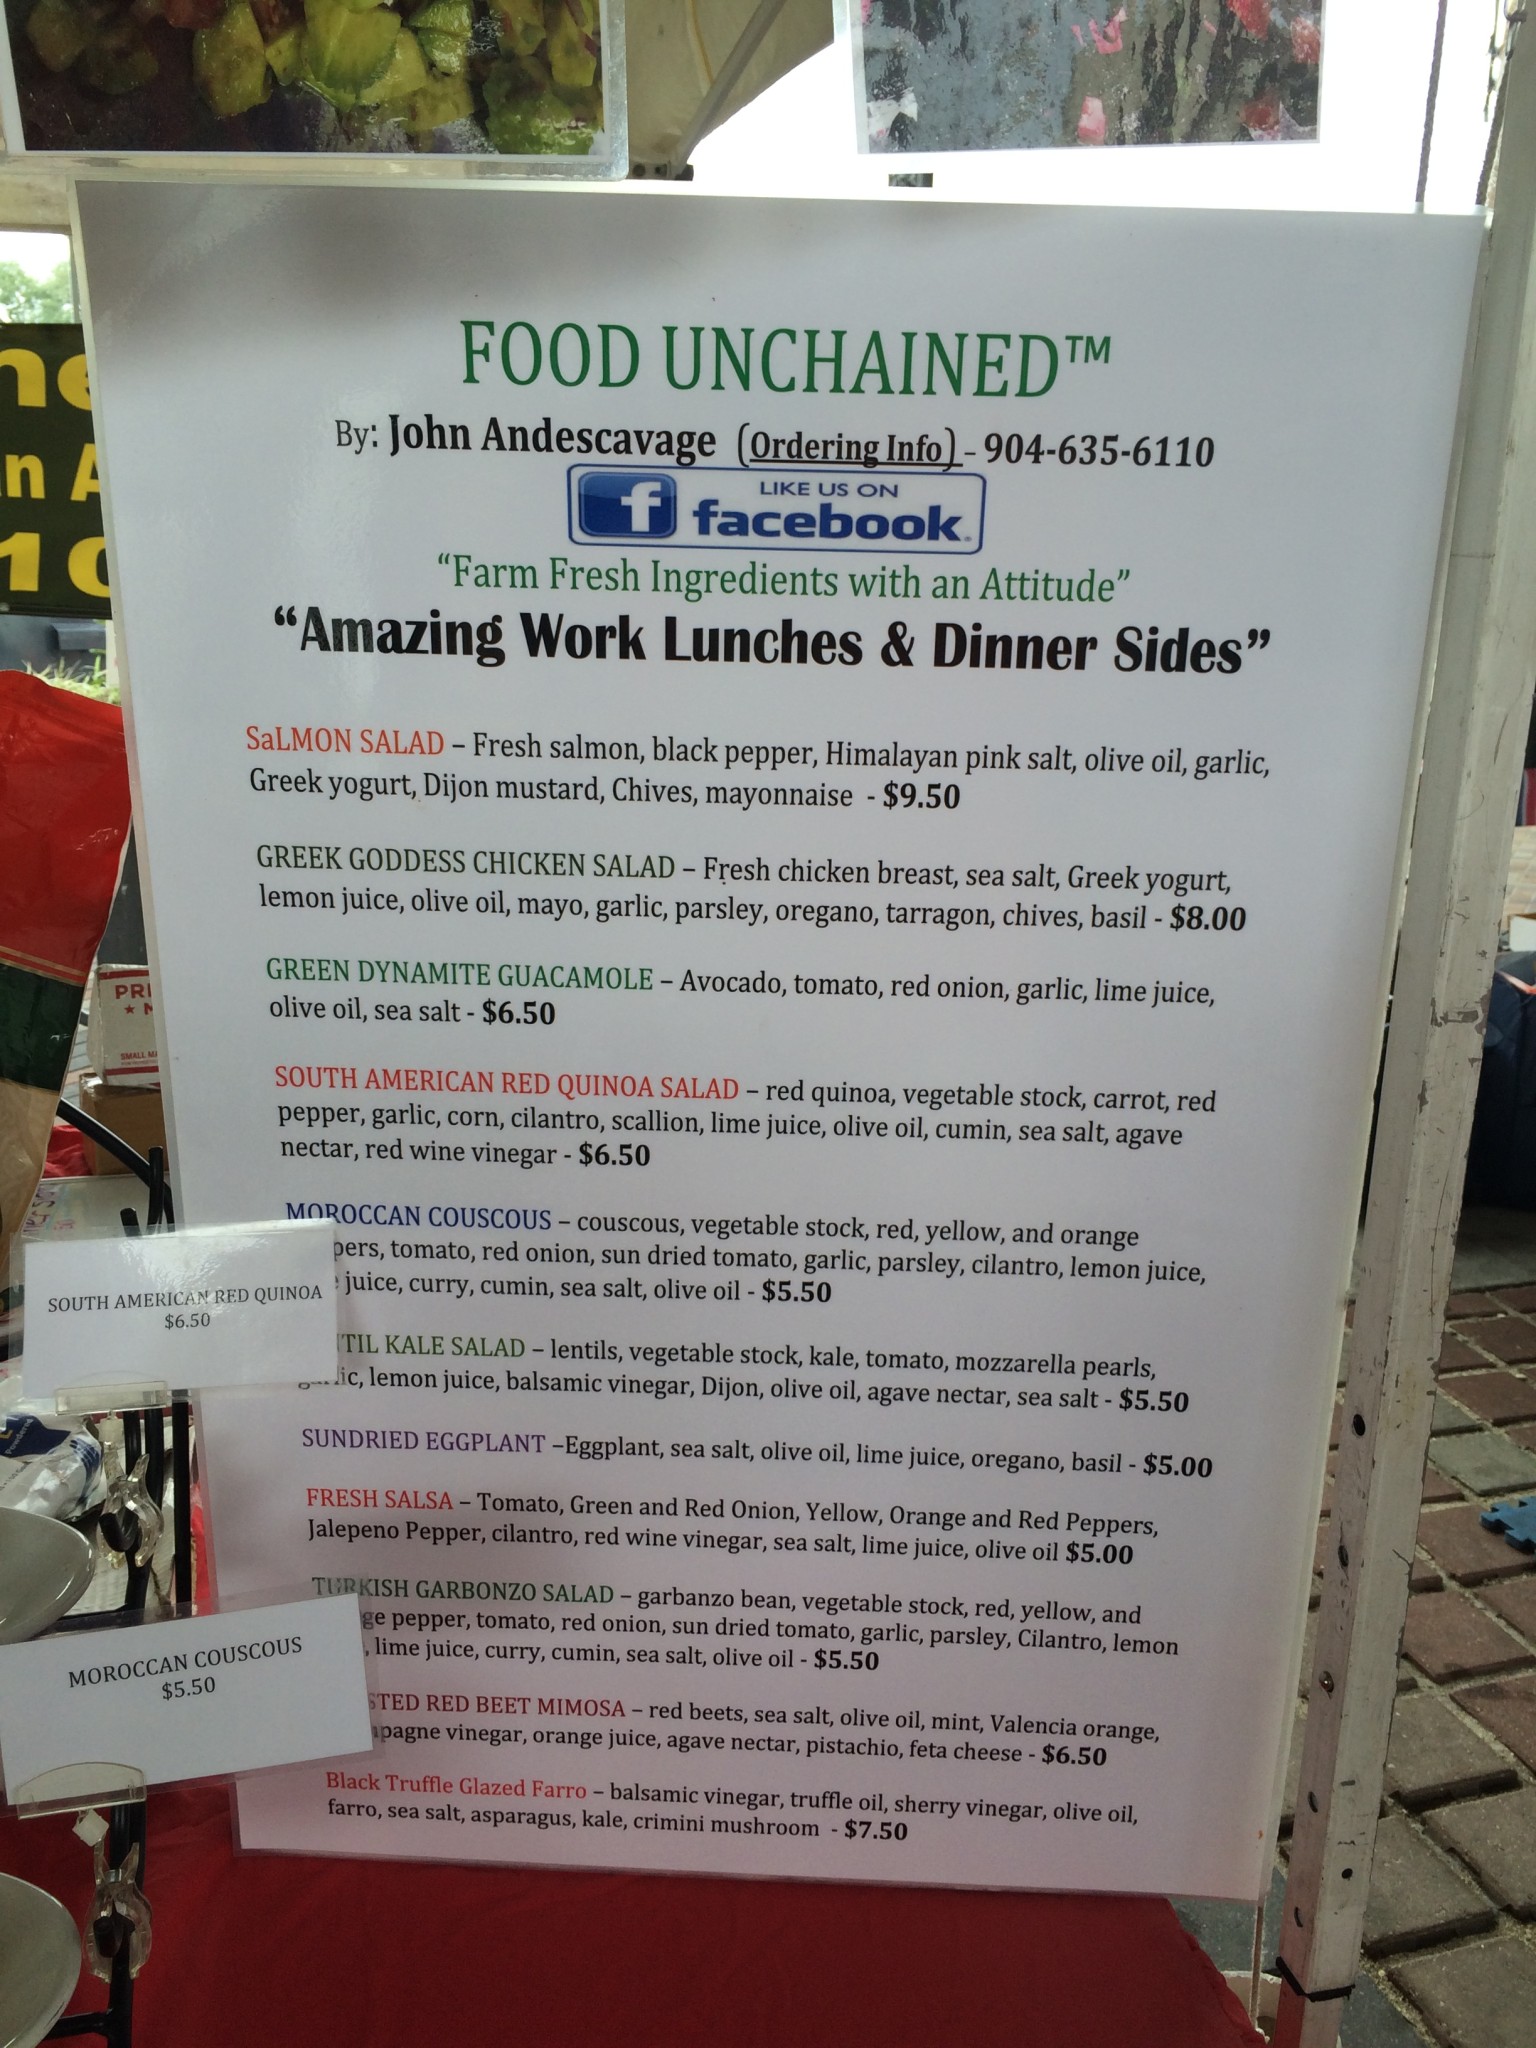 Food Unchained - Menu